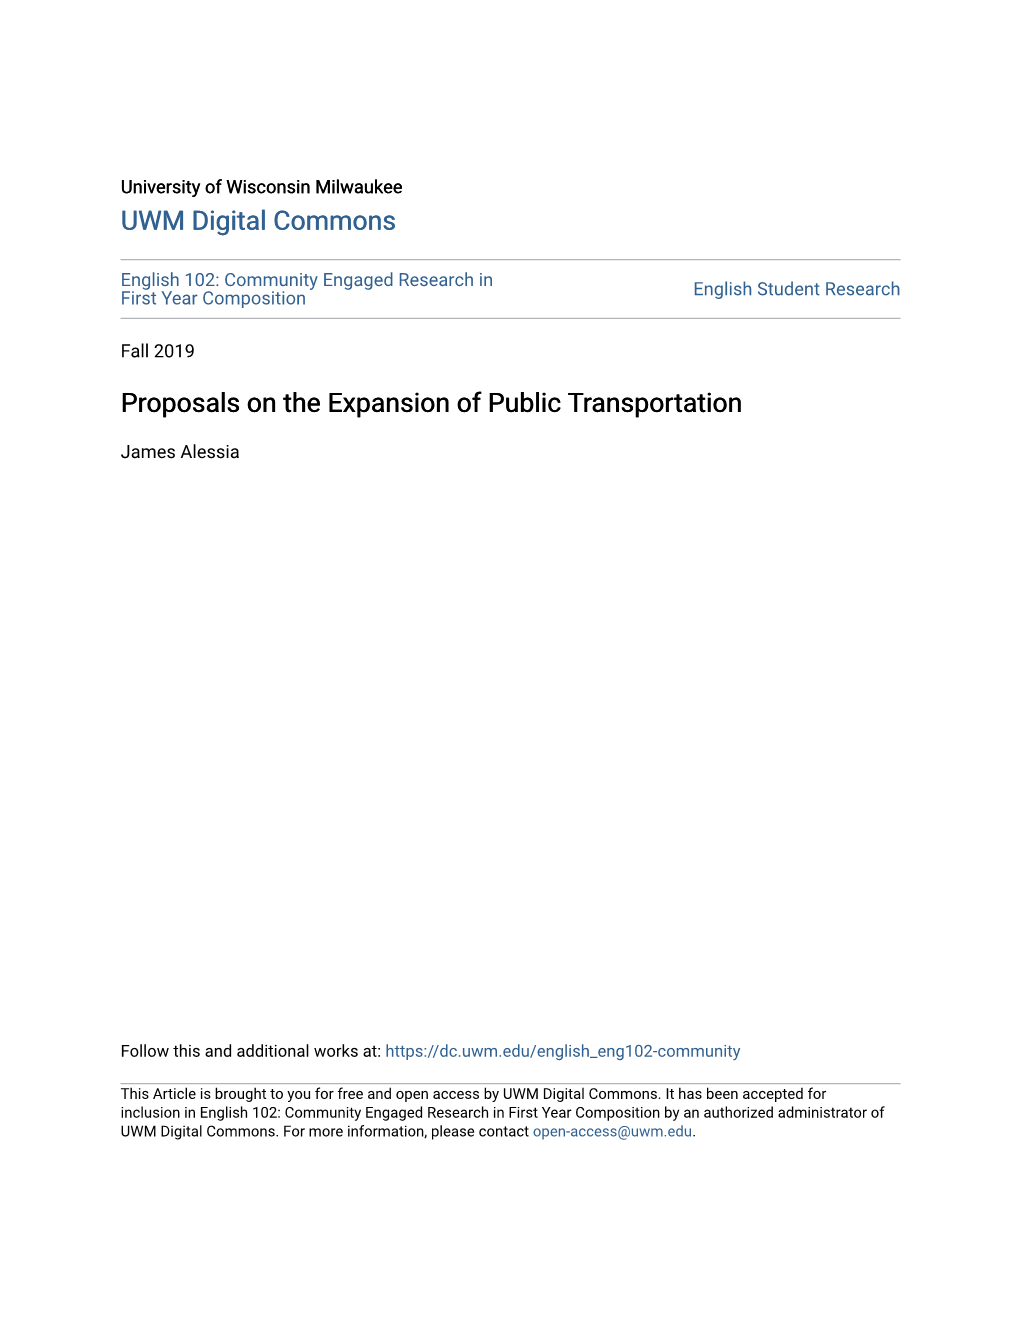 Proposals on the Expansion of Public Transportation